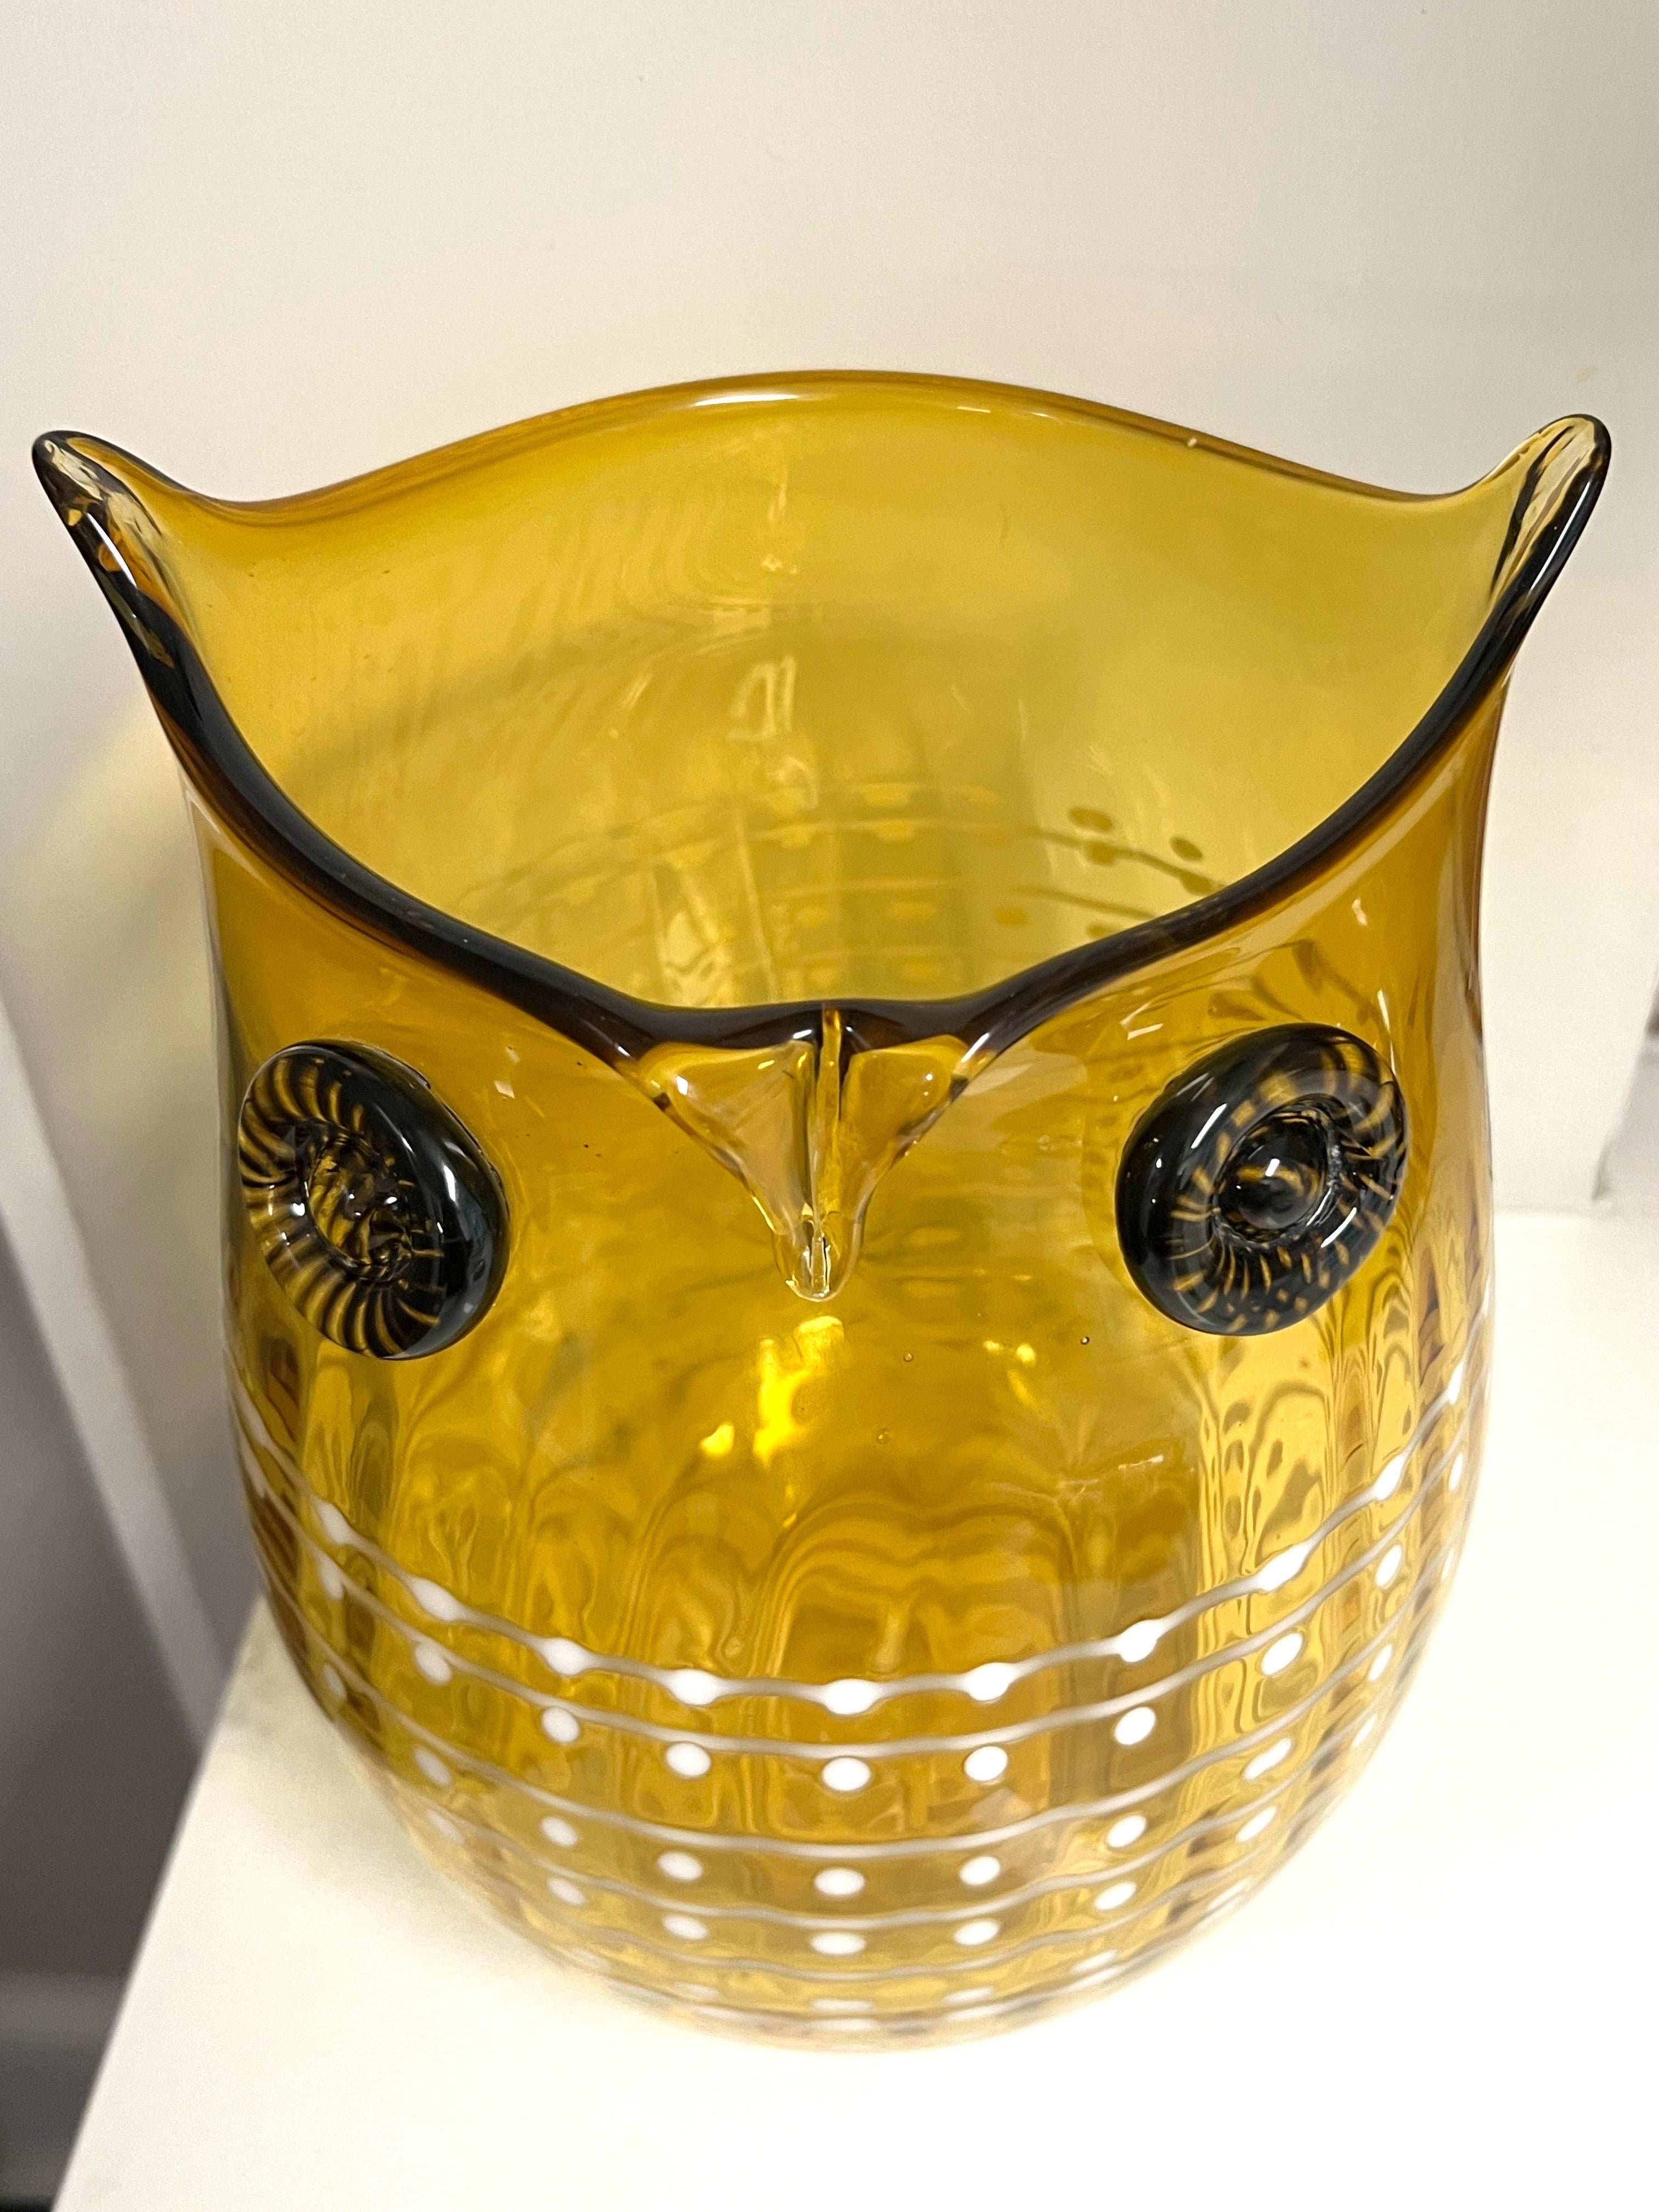 For sale here is a BIG vintage 1960s 70s handmade hand-blown Blenko art glass modernist design OWL vase with applied op-art black thread 'eyes' and applied white decoration over the golden body that spirals up from the bottom. A stunning modernist